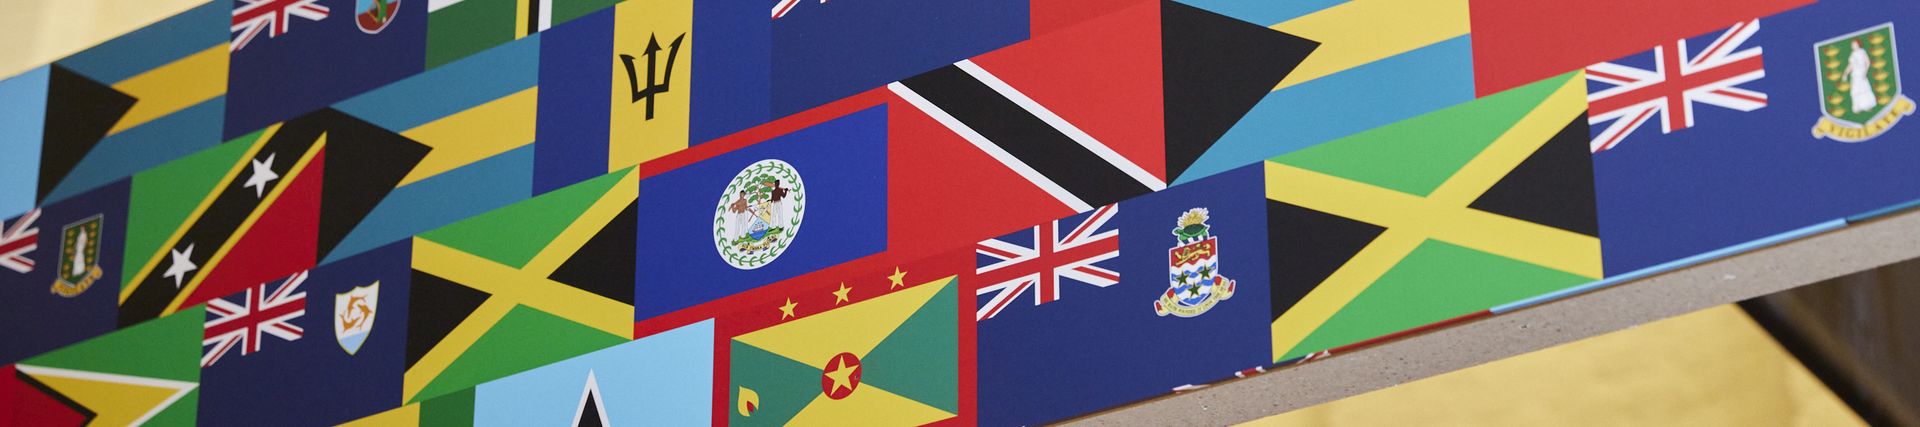 A display of Caribbean flags